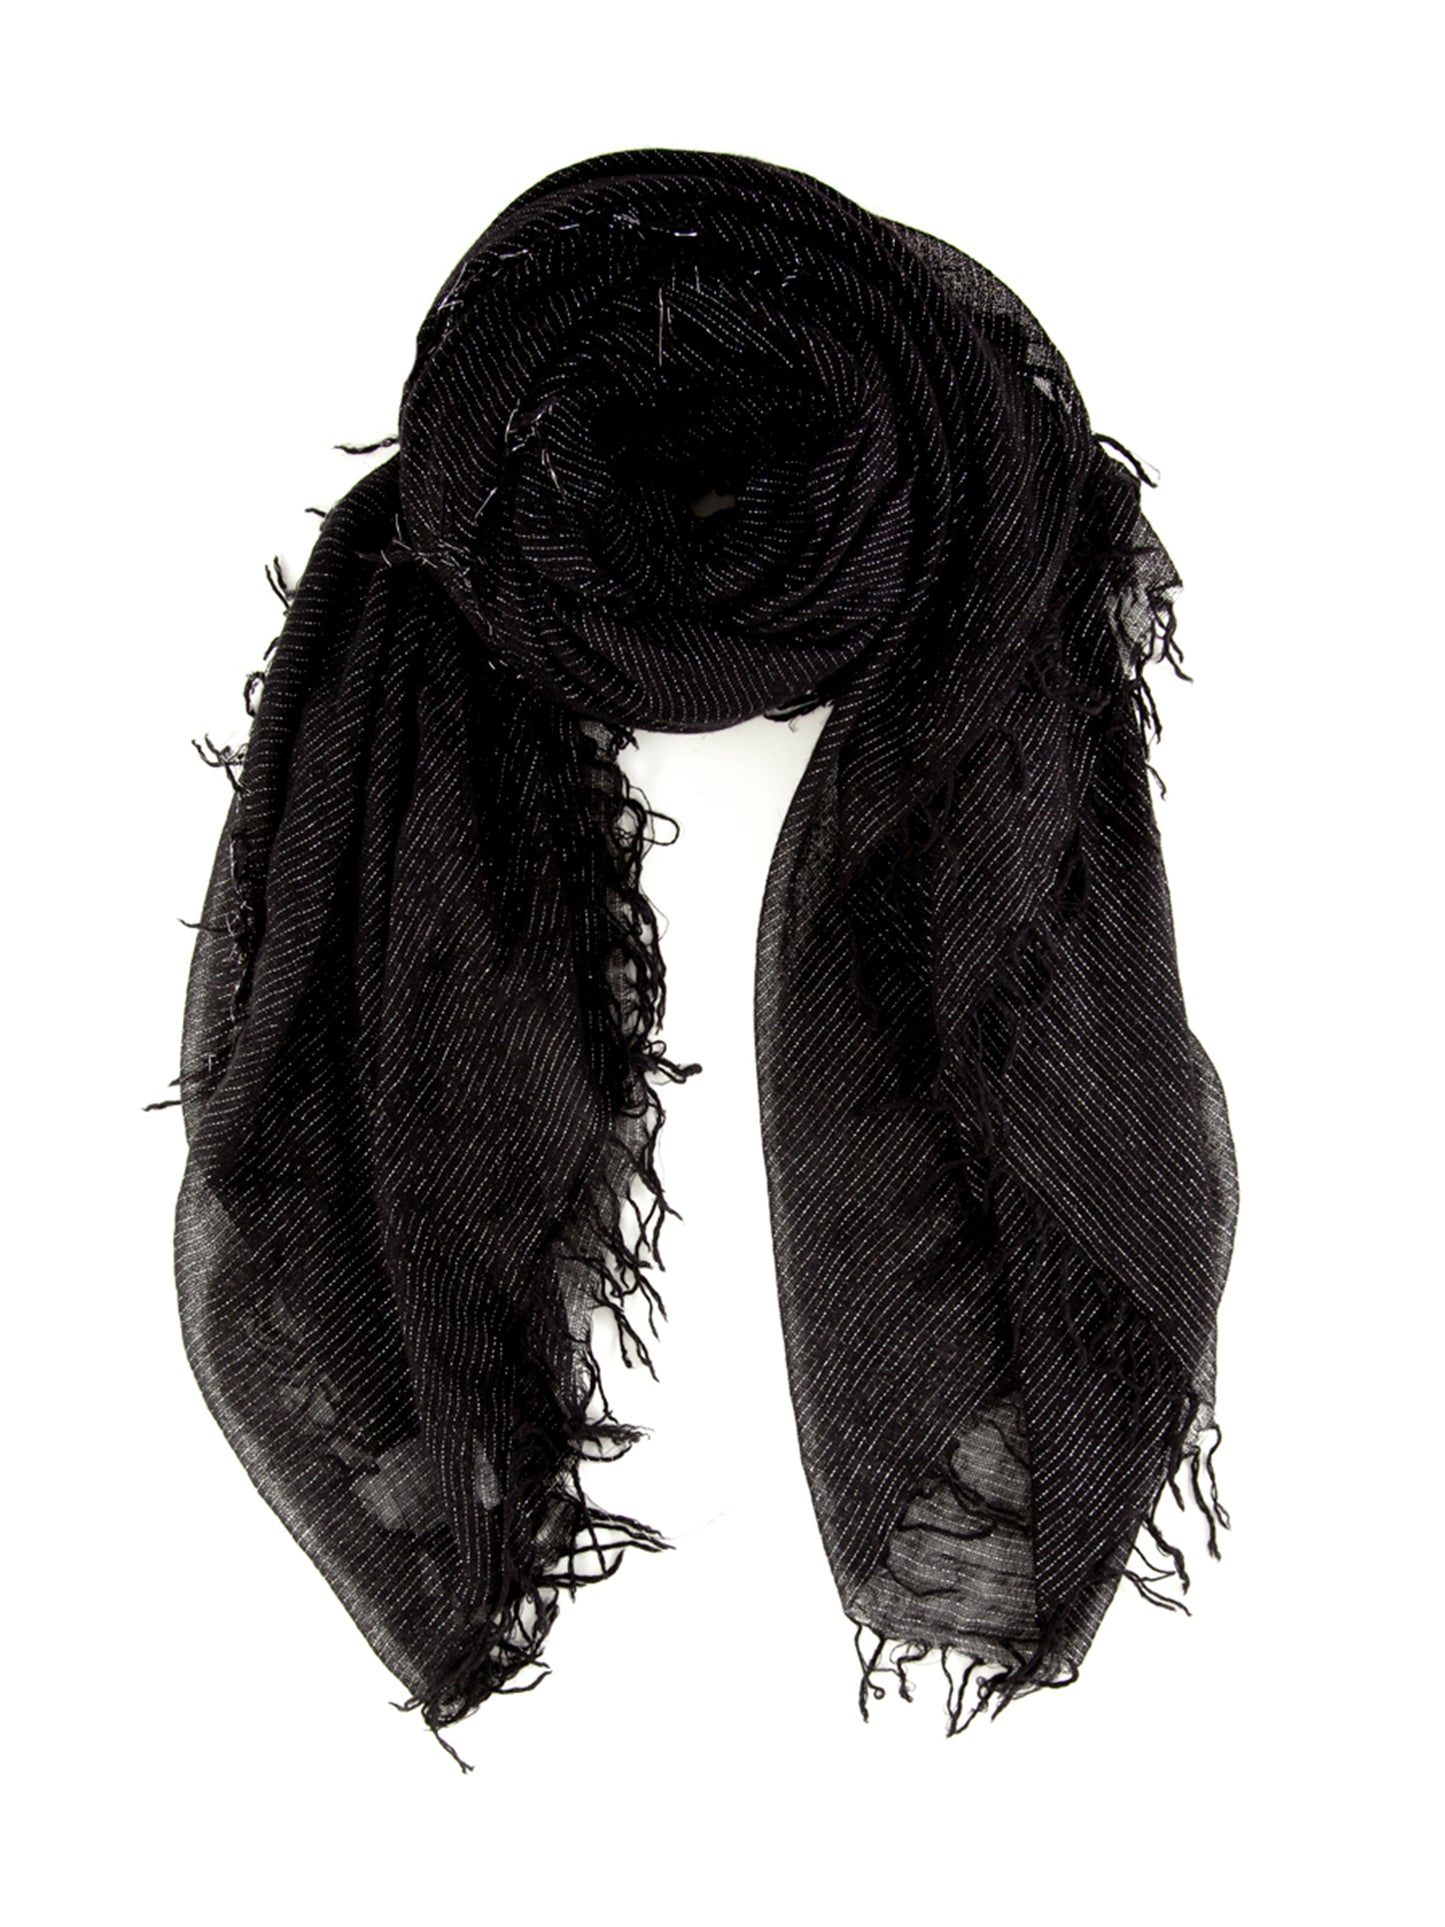 Black WIth Woven Lurex Cashmere Scarf